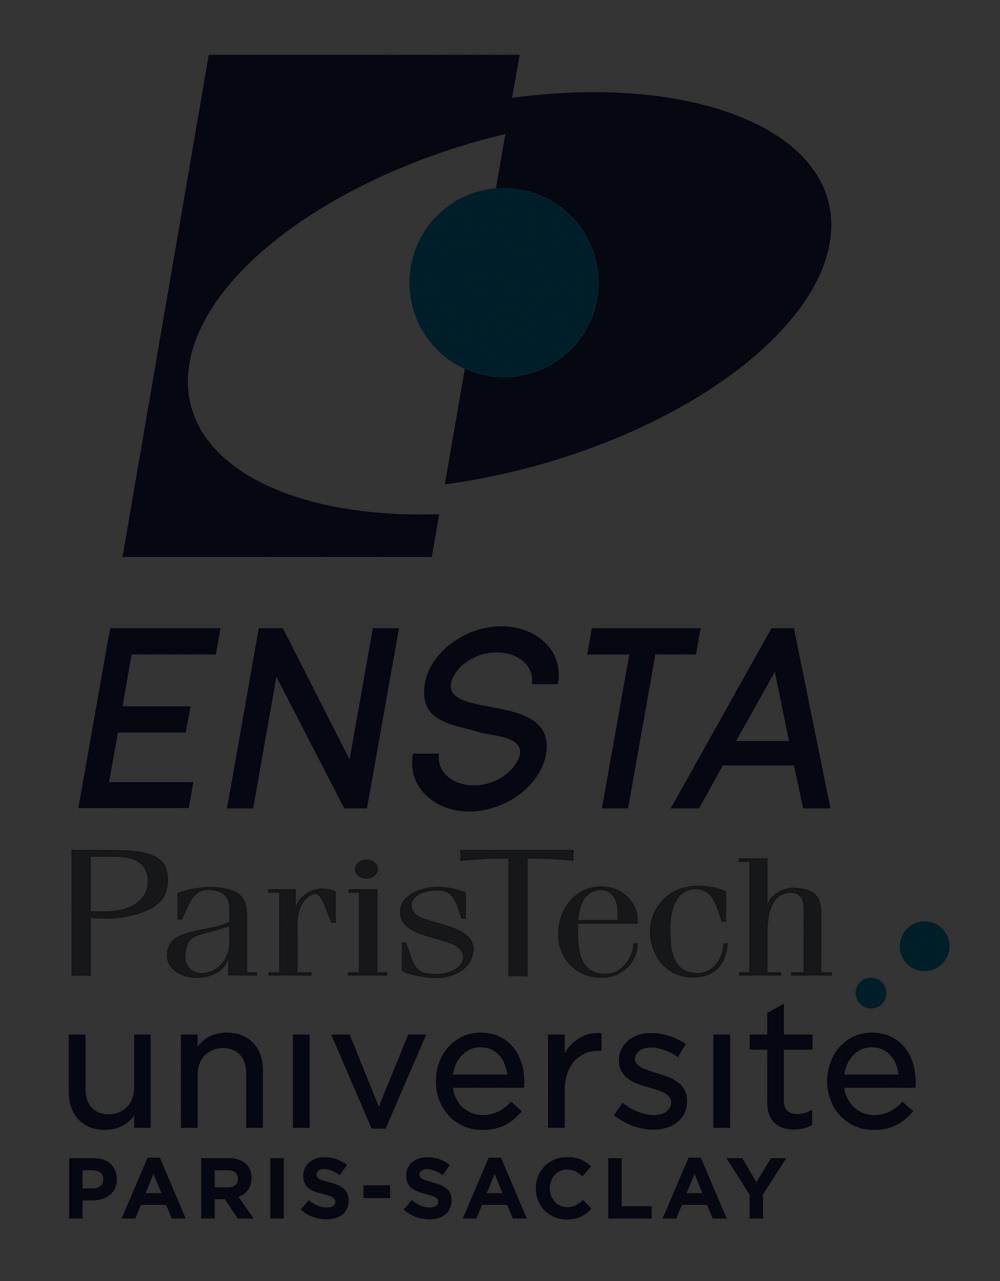 Your host ENSTA ParisTech Originally founded in 1741, ENSTA (Ecole Nationale Supérieure de Techniques Avancées) is today one of the top French institutes of higher education in engineering.